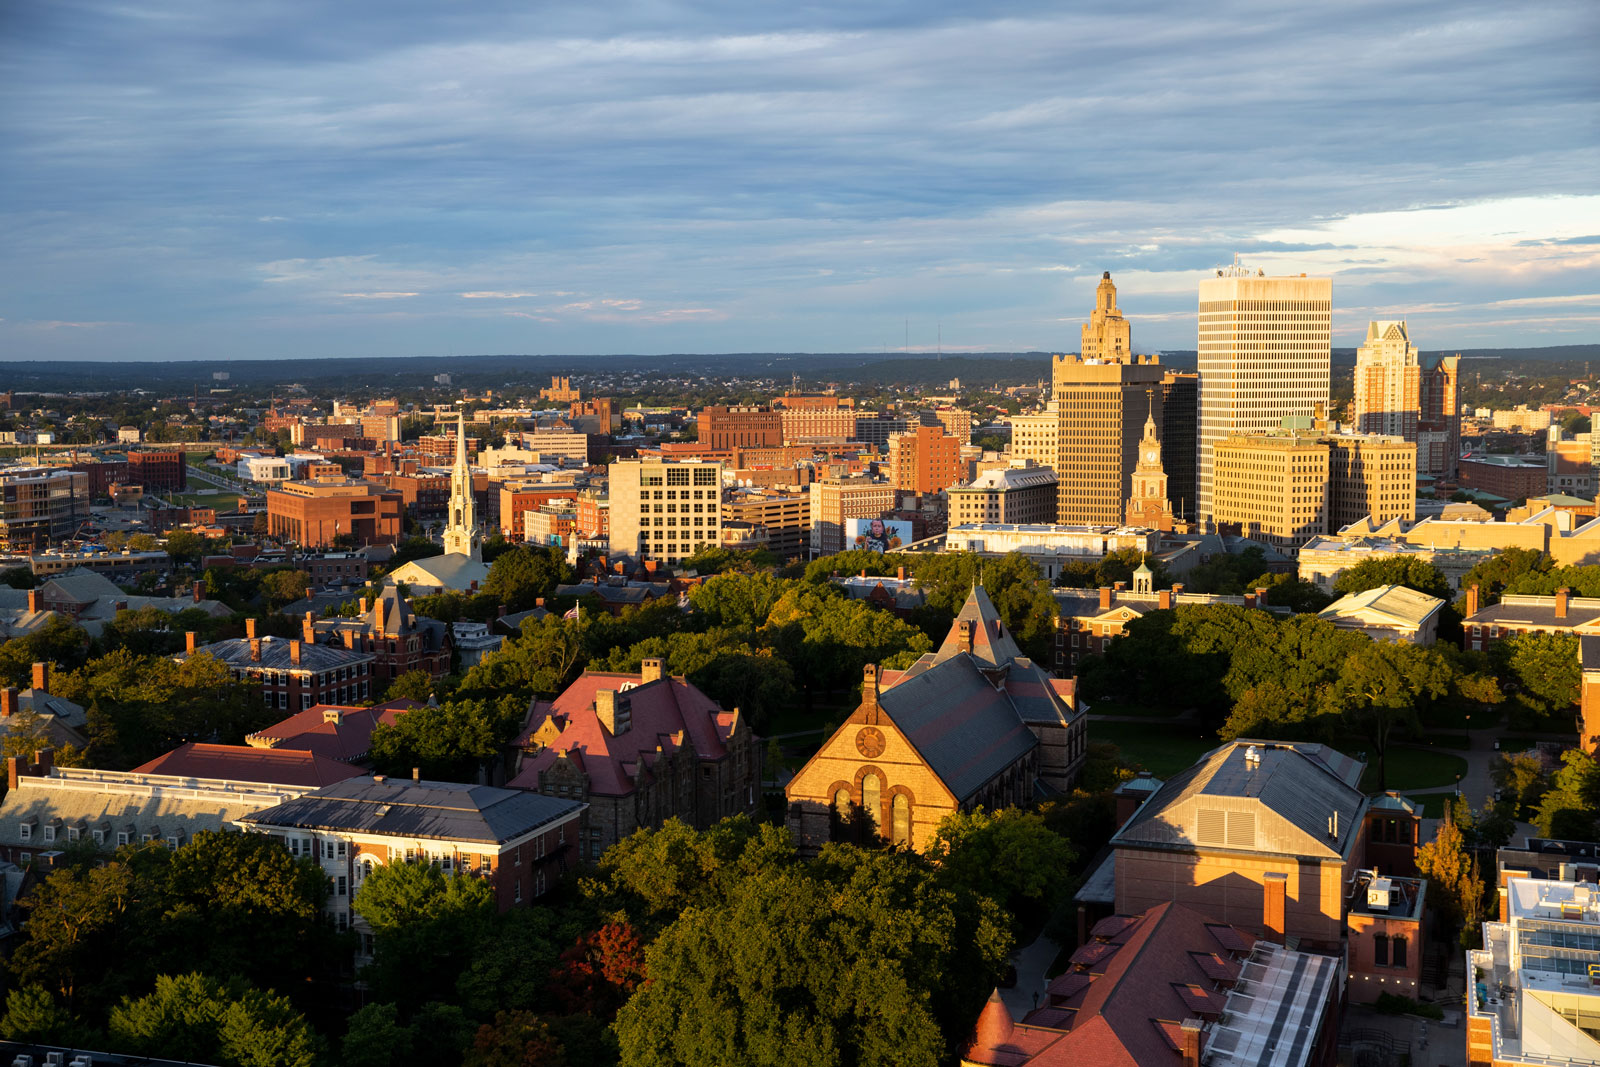 An image of the Providence skyline